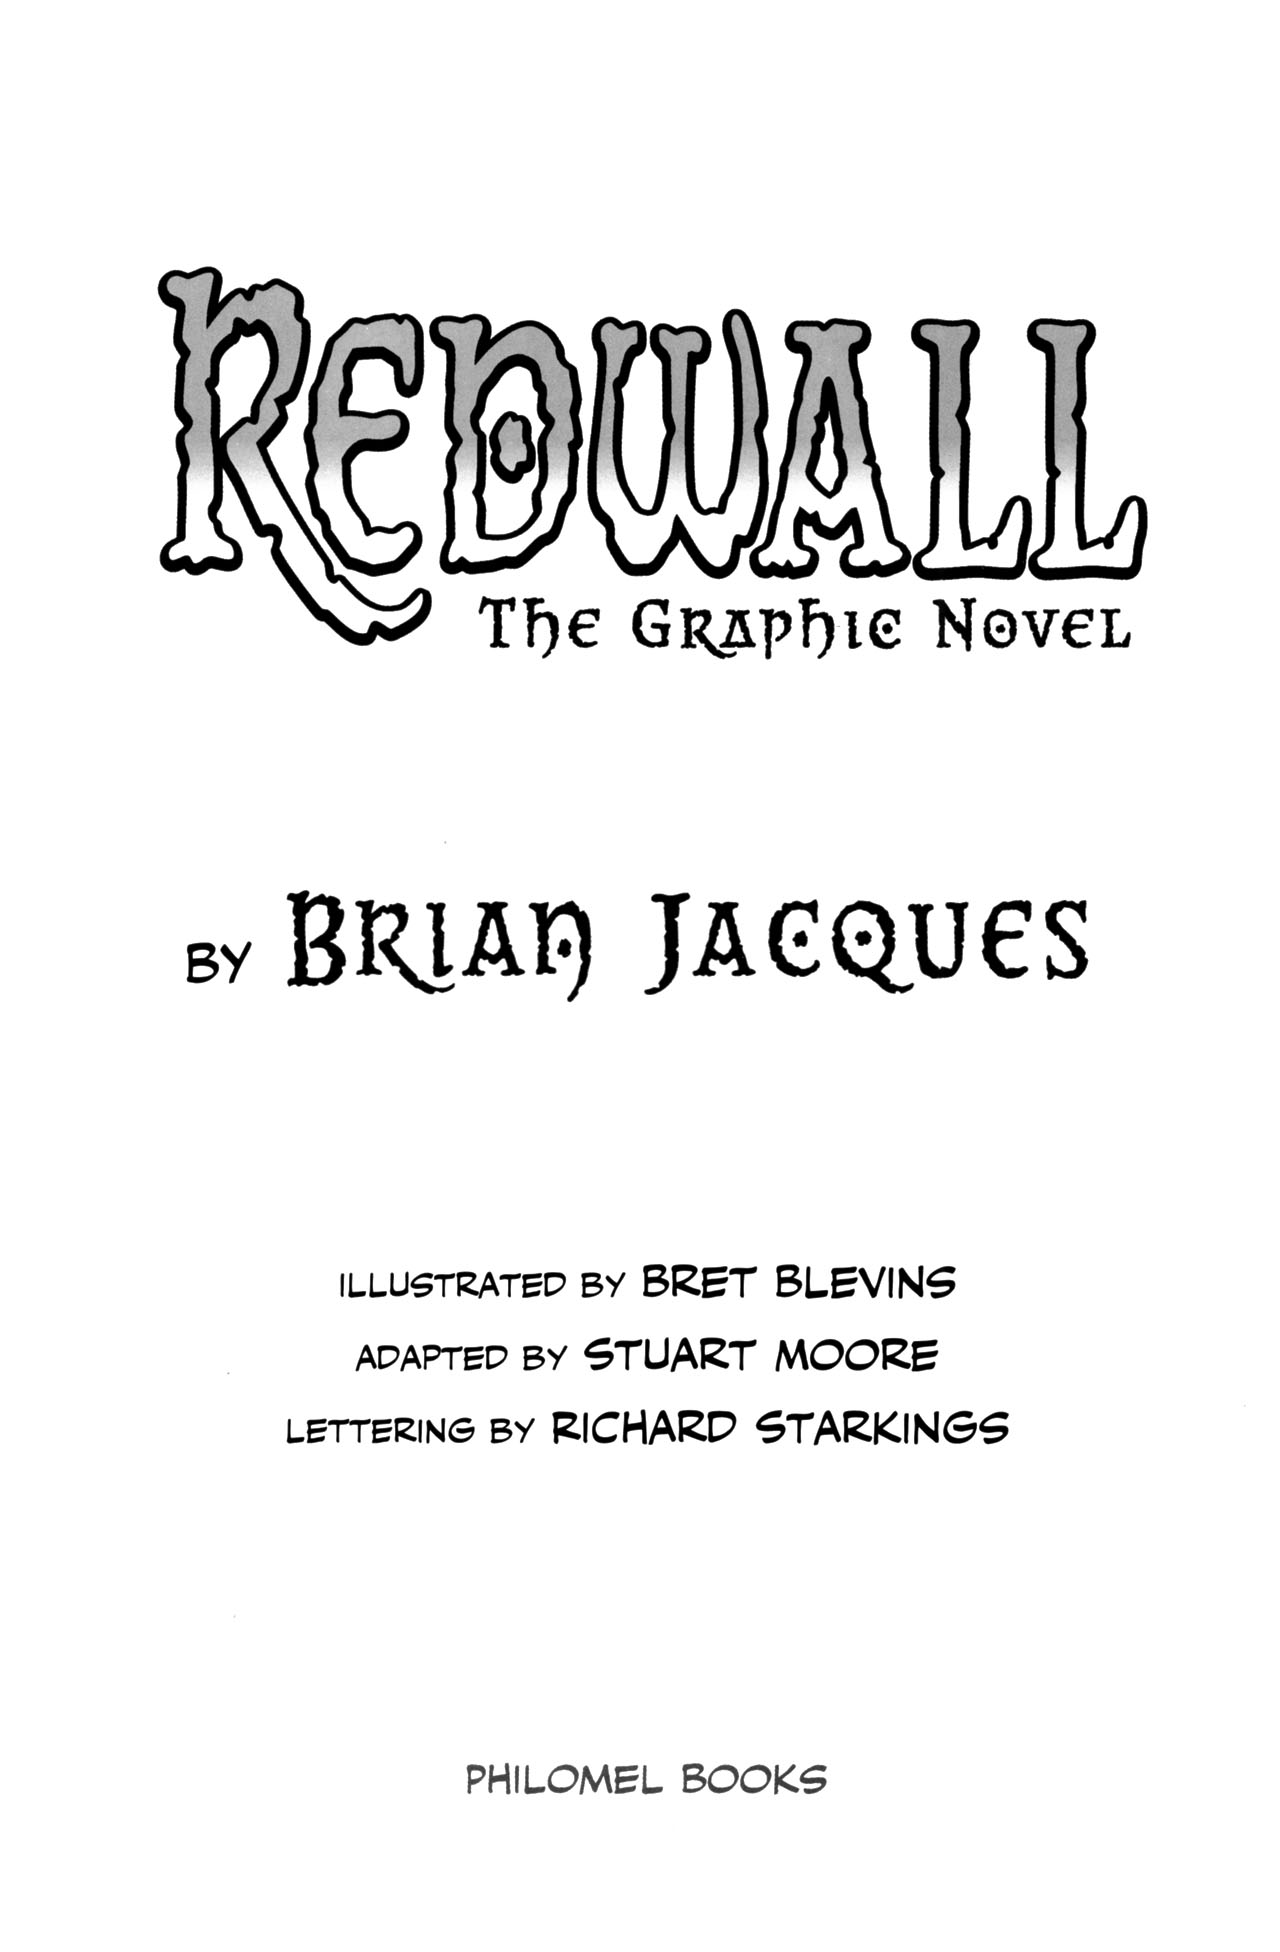 Read online Redwall: The Graphic Novel comic -  Issue # TPB - 4